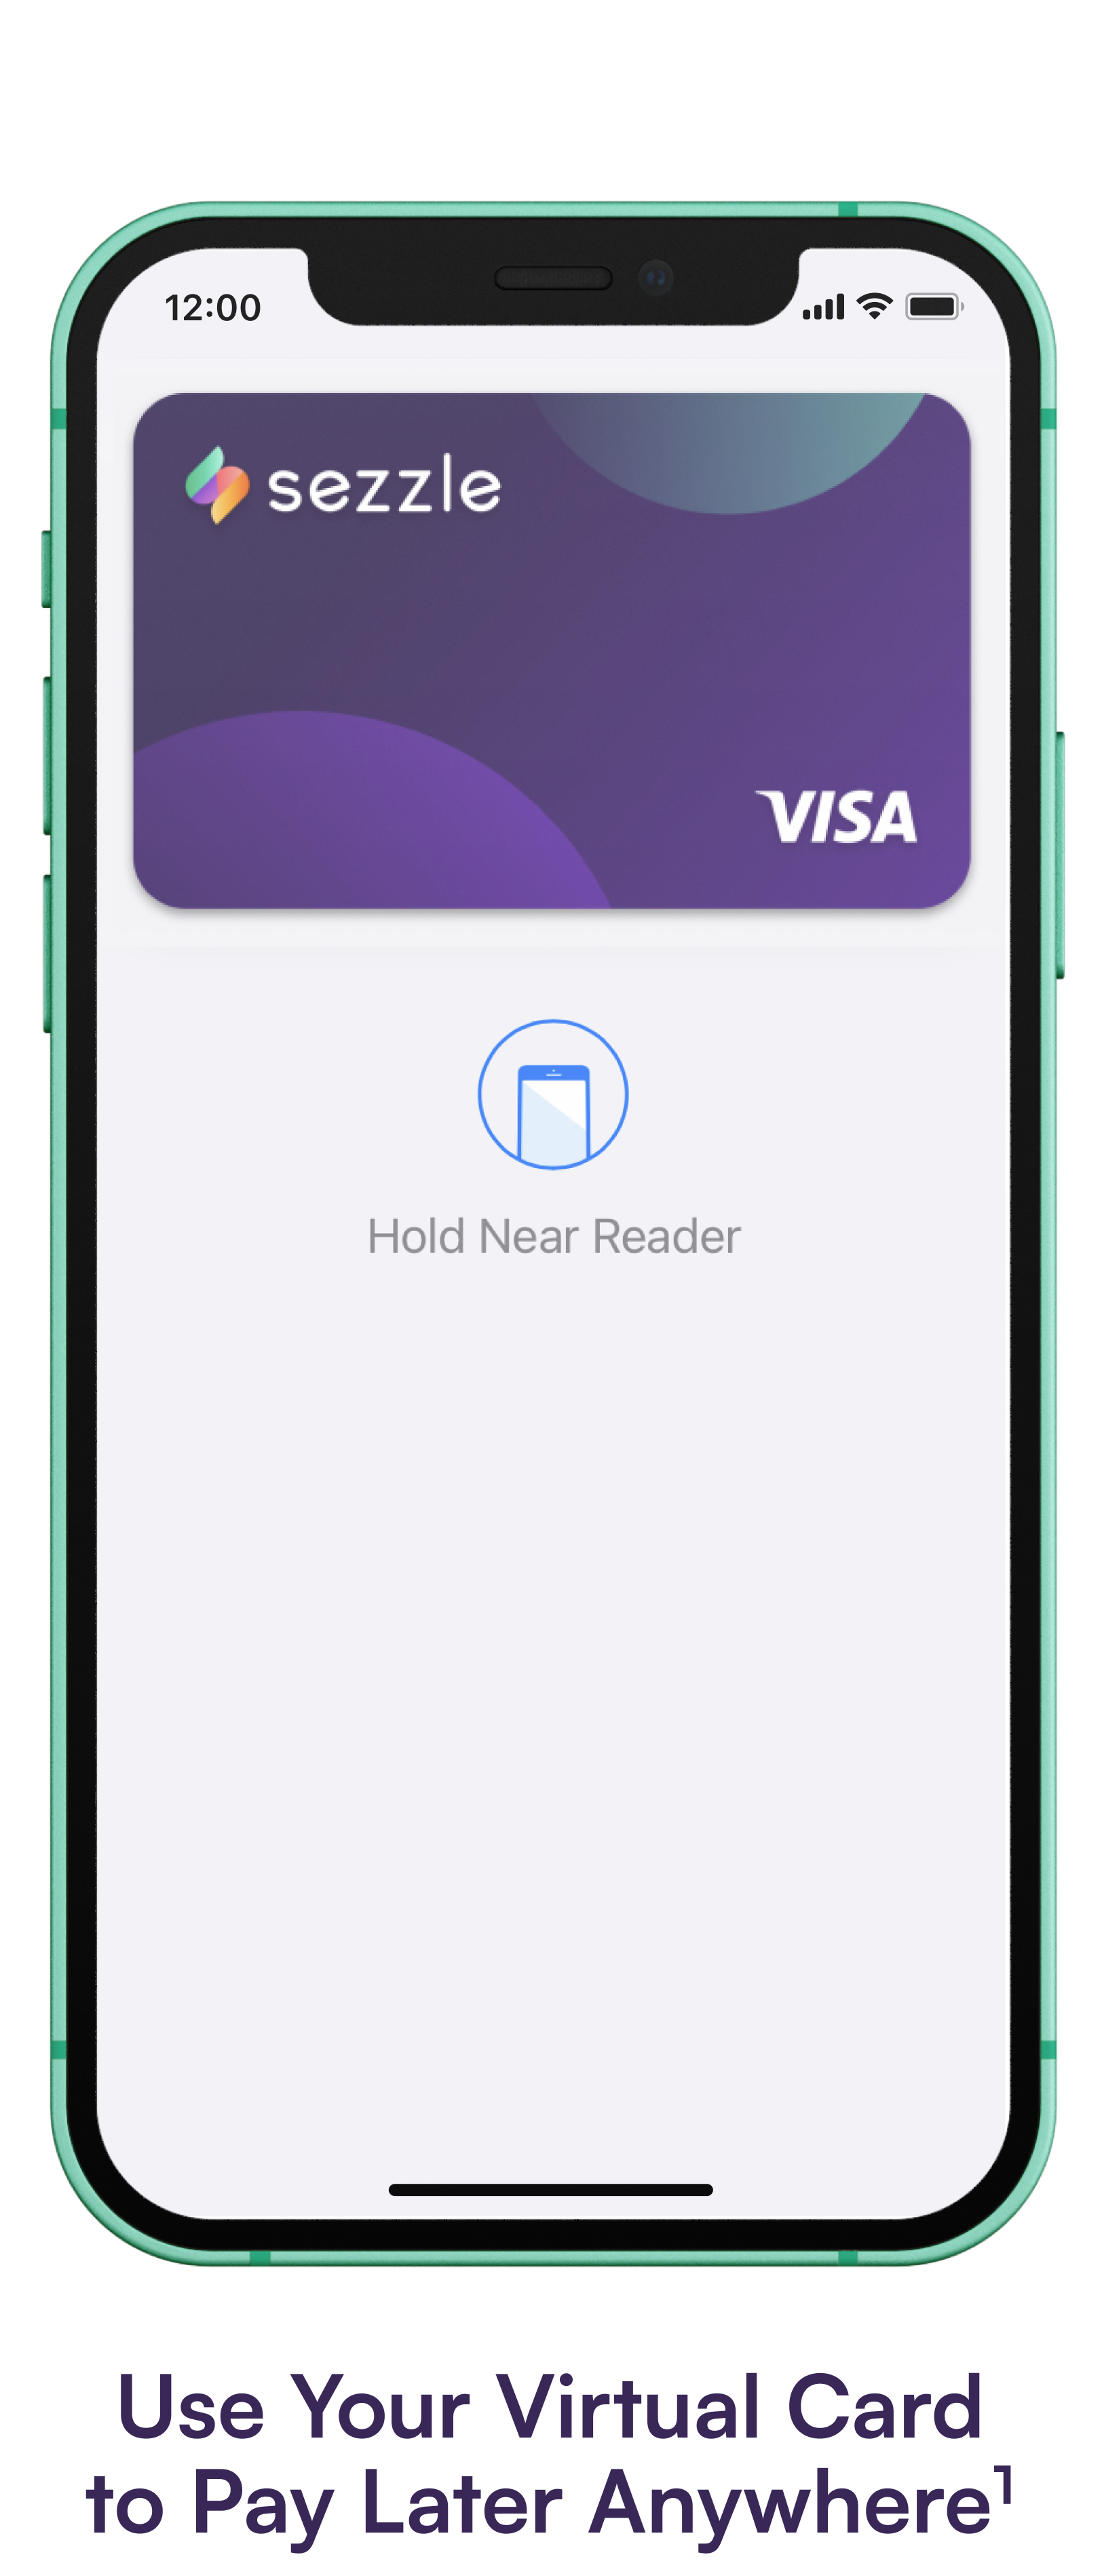 Phone screen showing Sezzle Virtual Card in Apple Wallet.